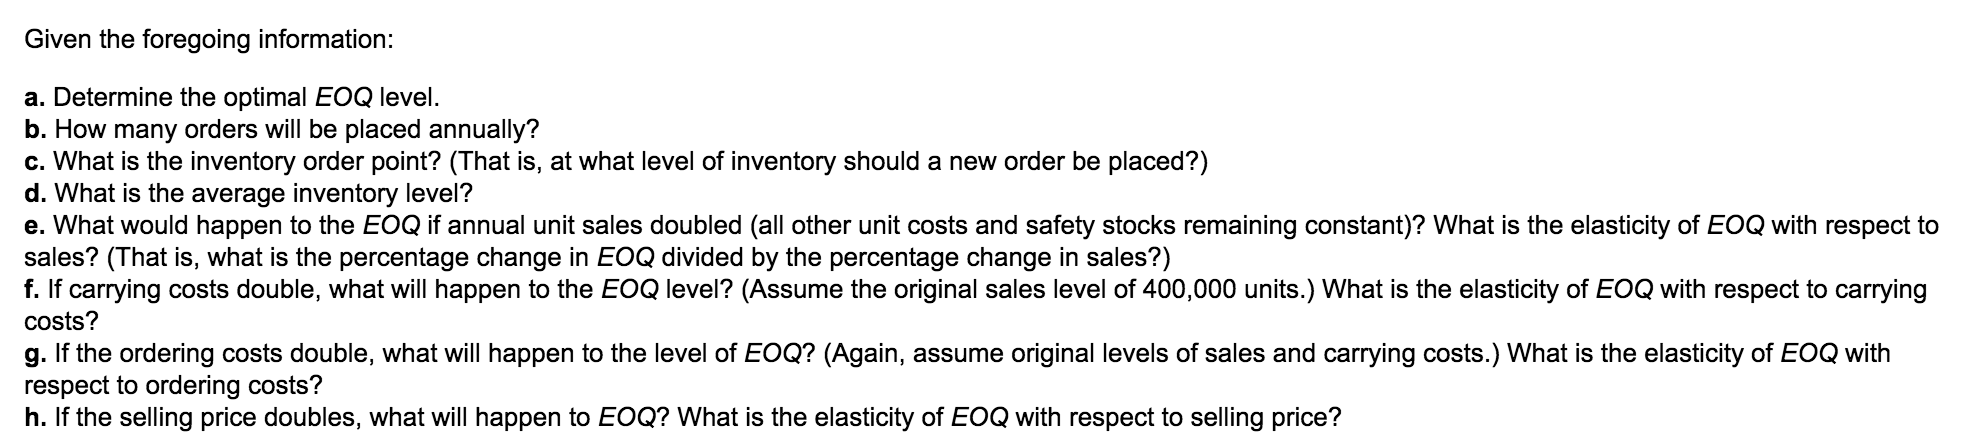 eoq with back orders find average time to meet demand